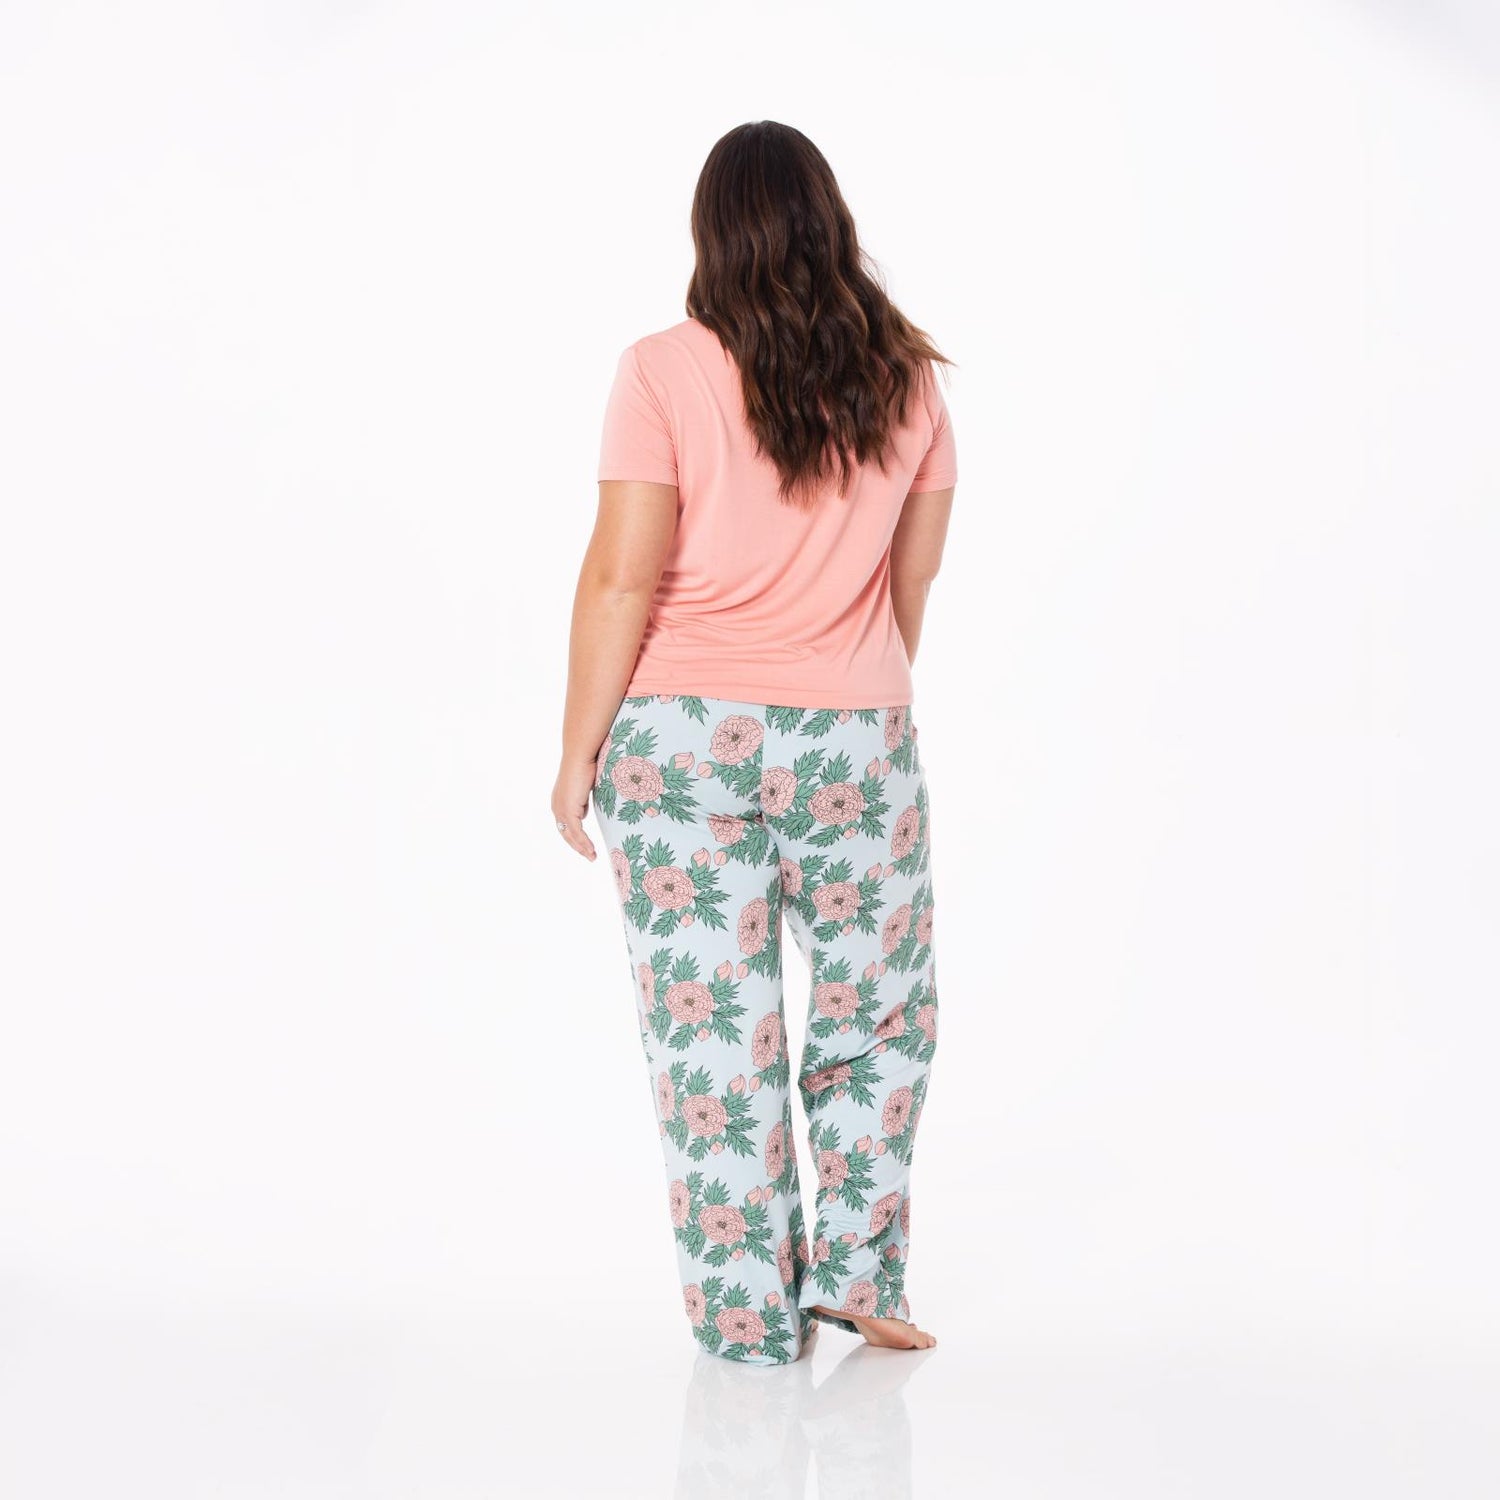 Women's Print Short Sleeve Relaxed Tee & Pajama Pants Set in Spring Sky Floral